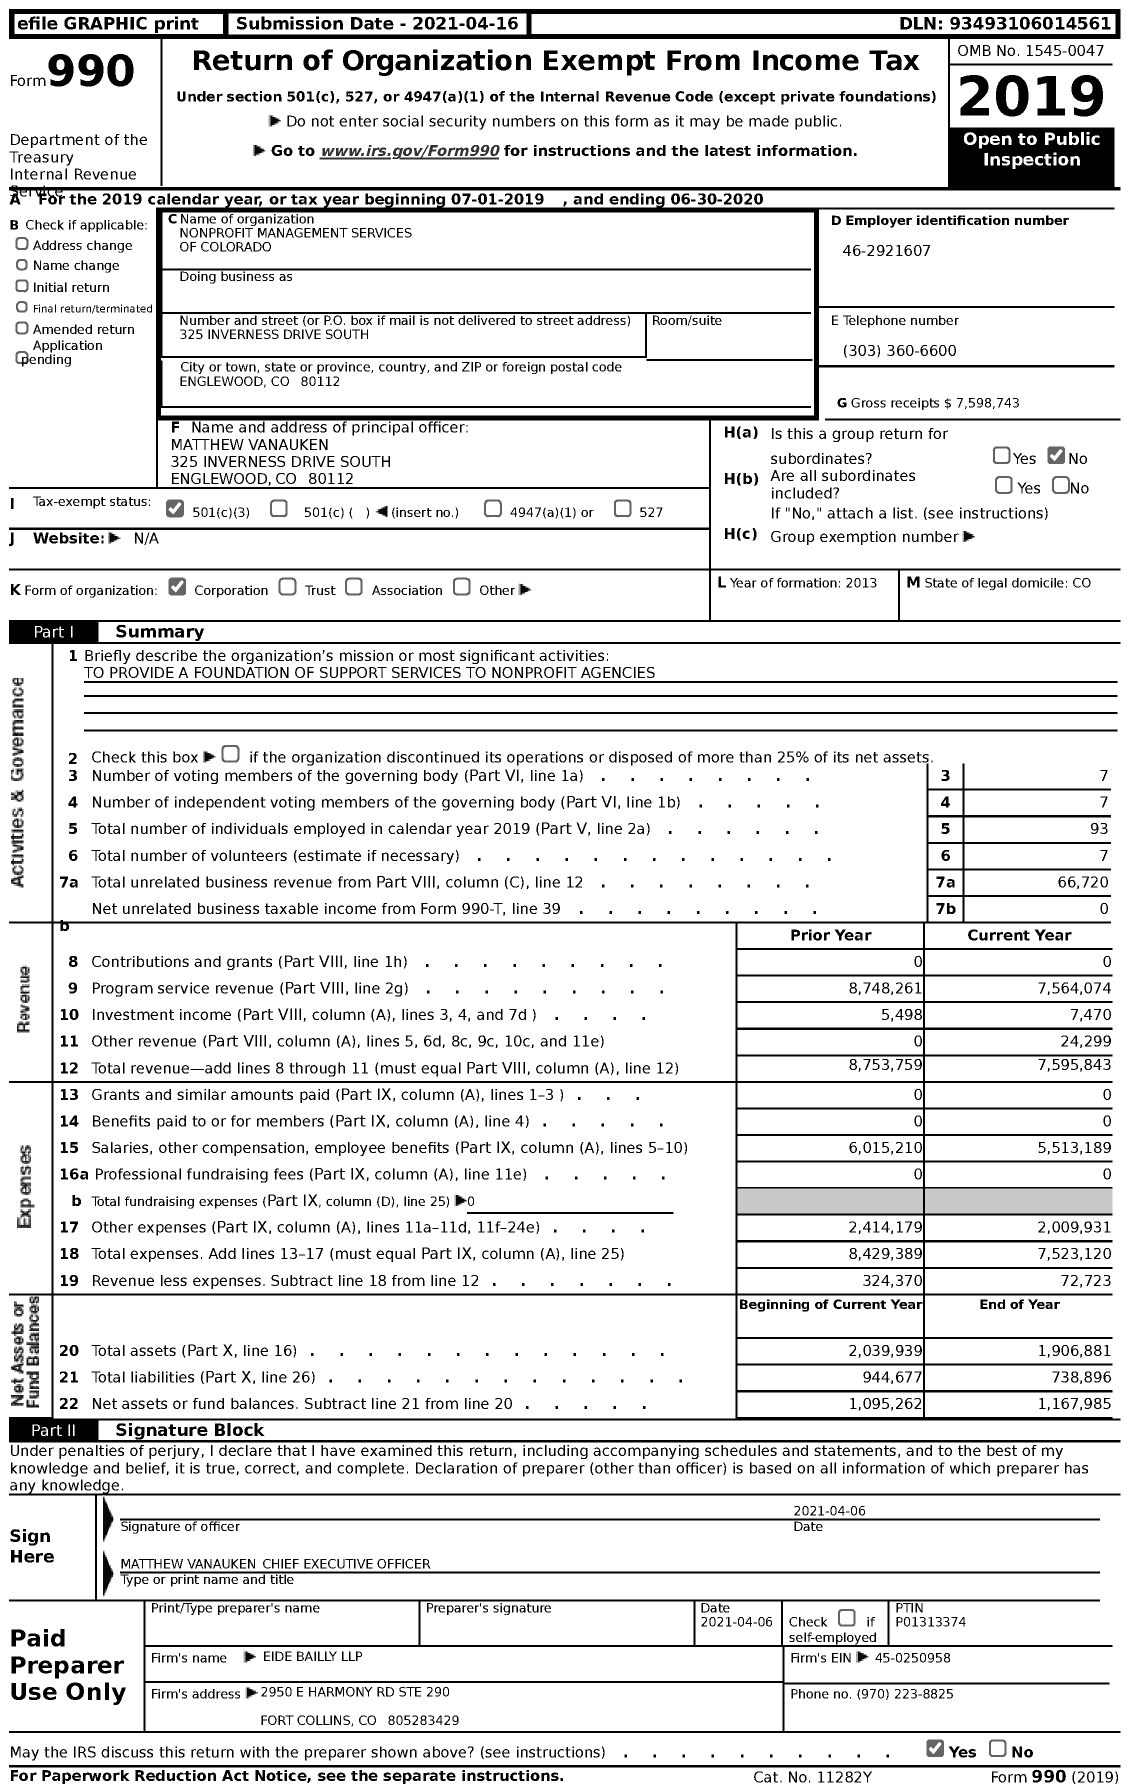 Image of first page of 2019 Form 990 for Nonprofit Management Services of Colorado (NMSC)